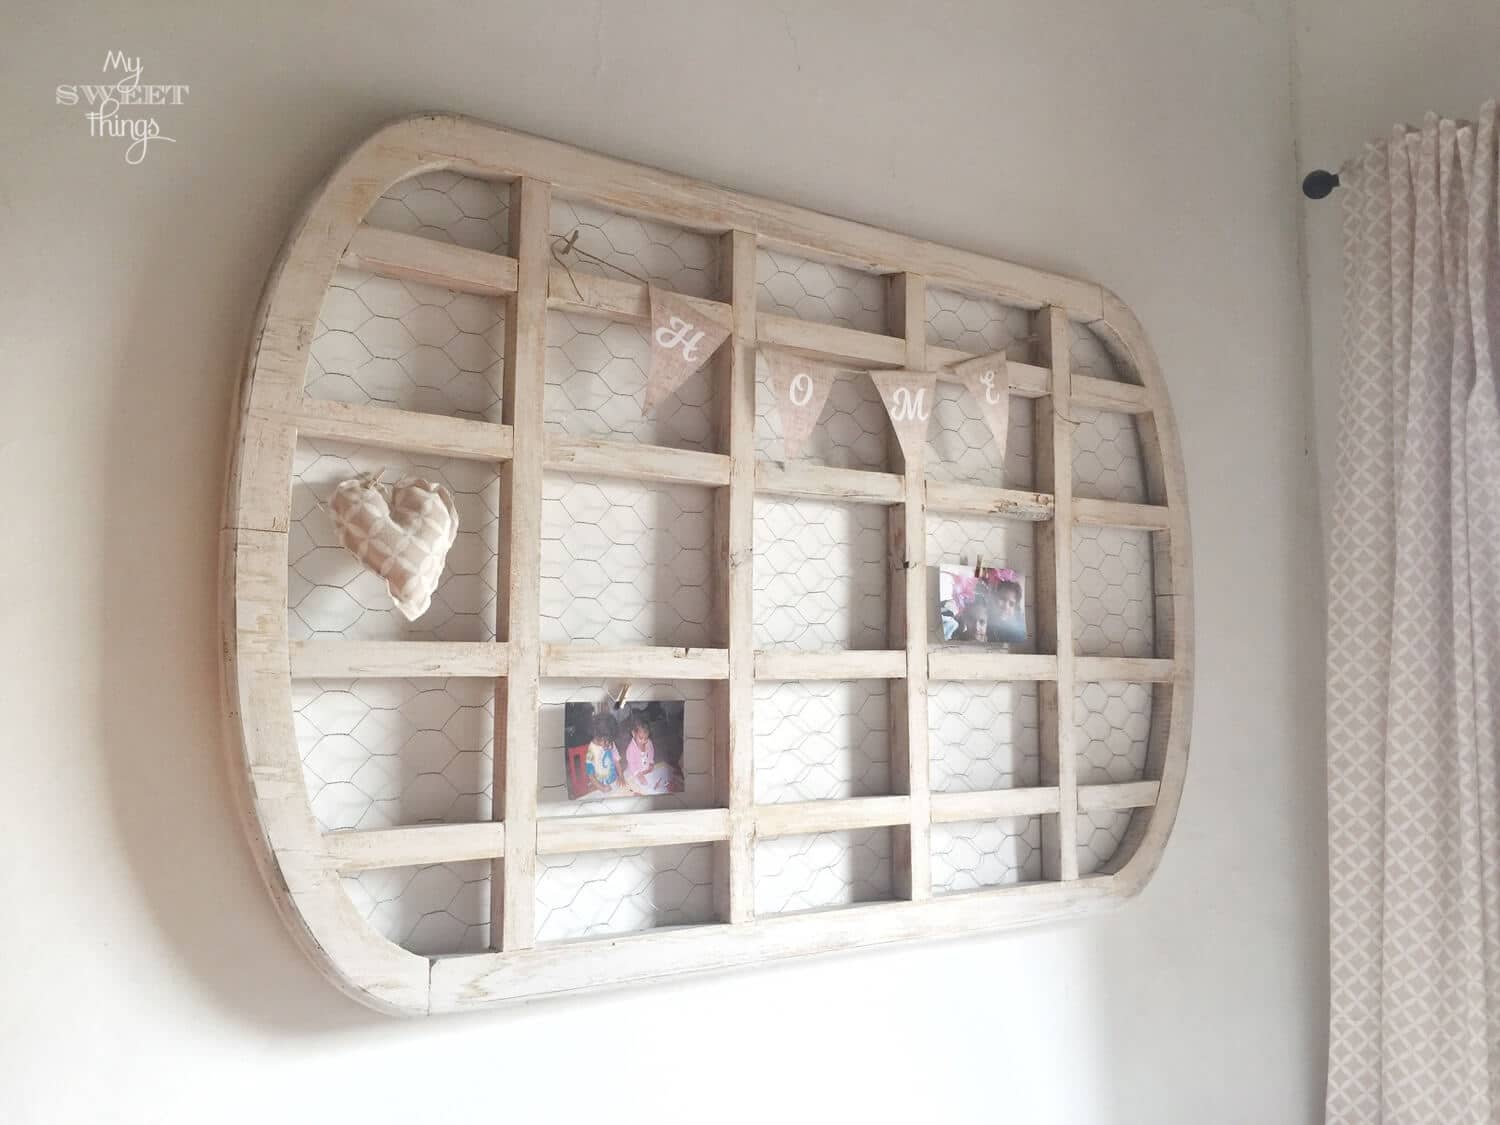 Upcycled Table Into Wooden Wall Display · Via www.sweethings.net